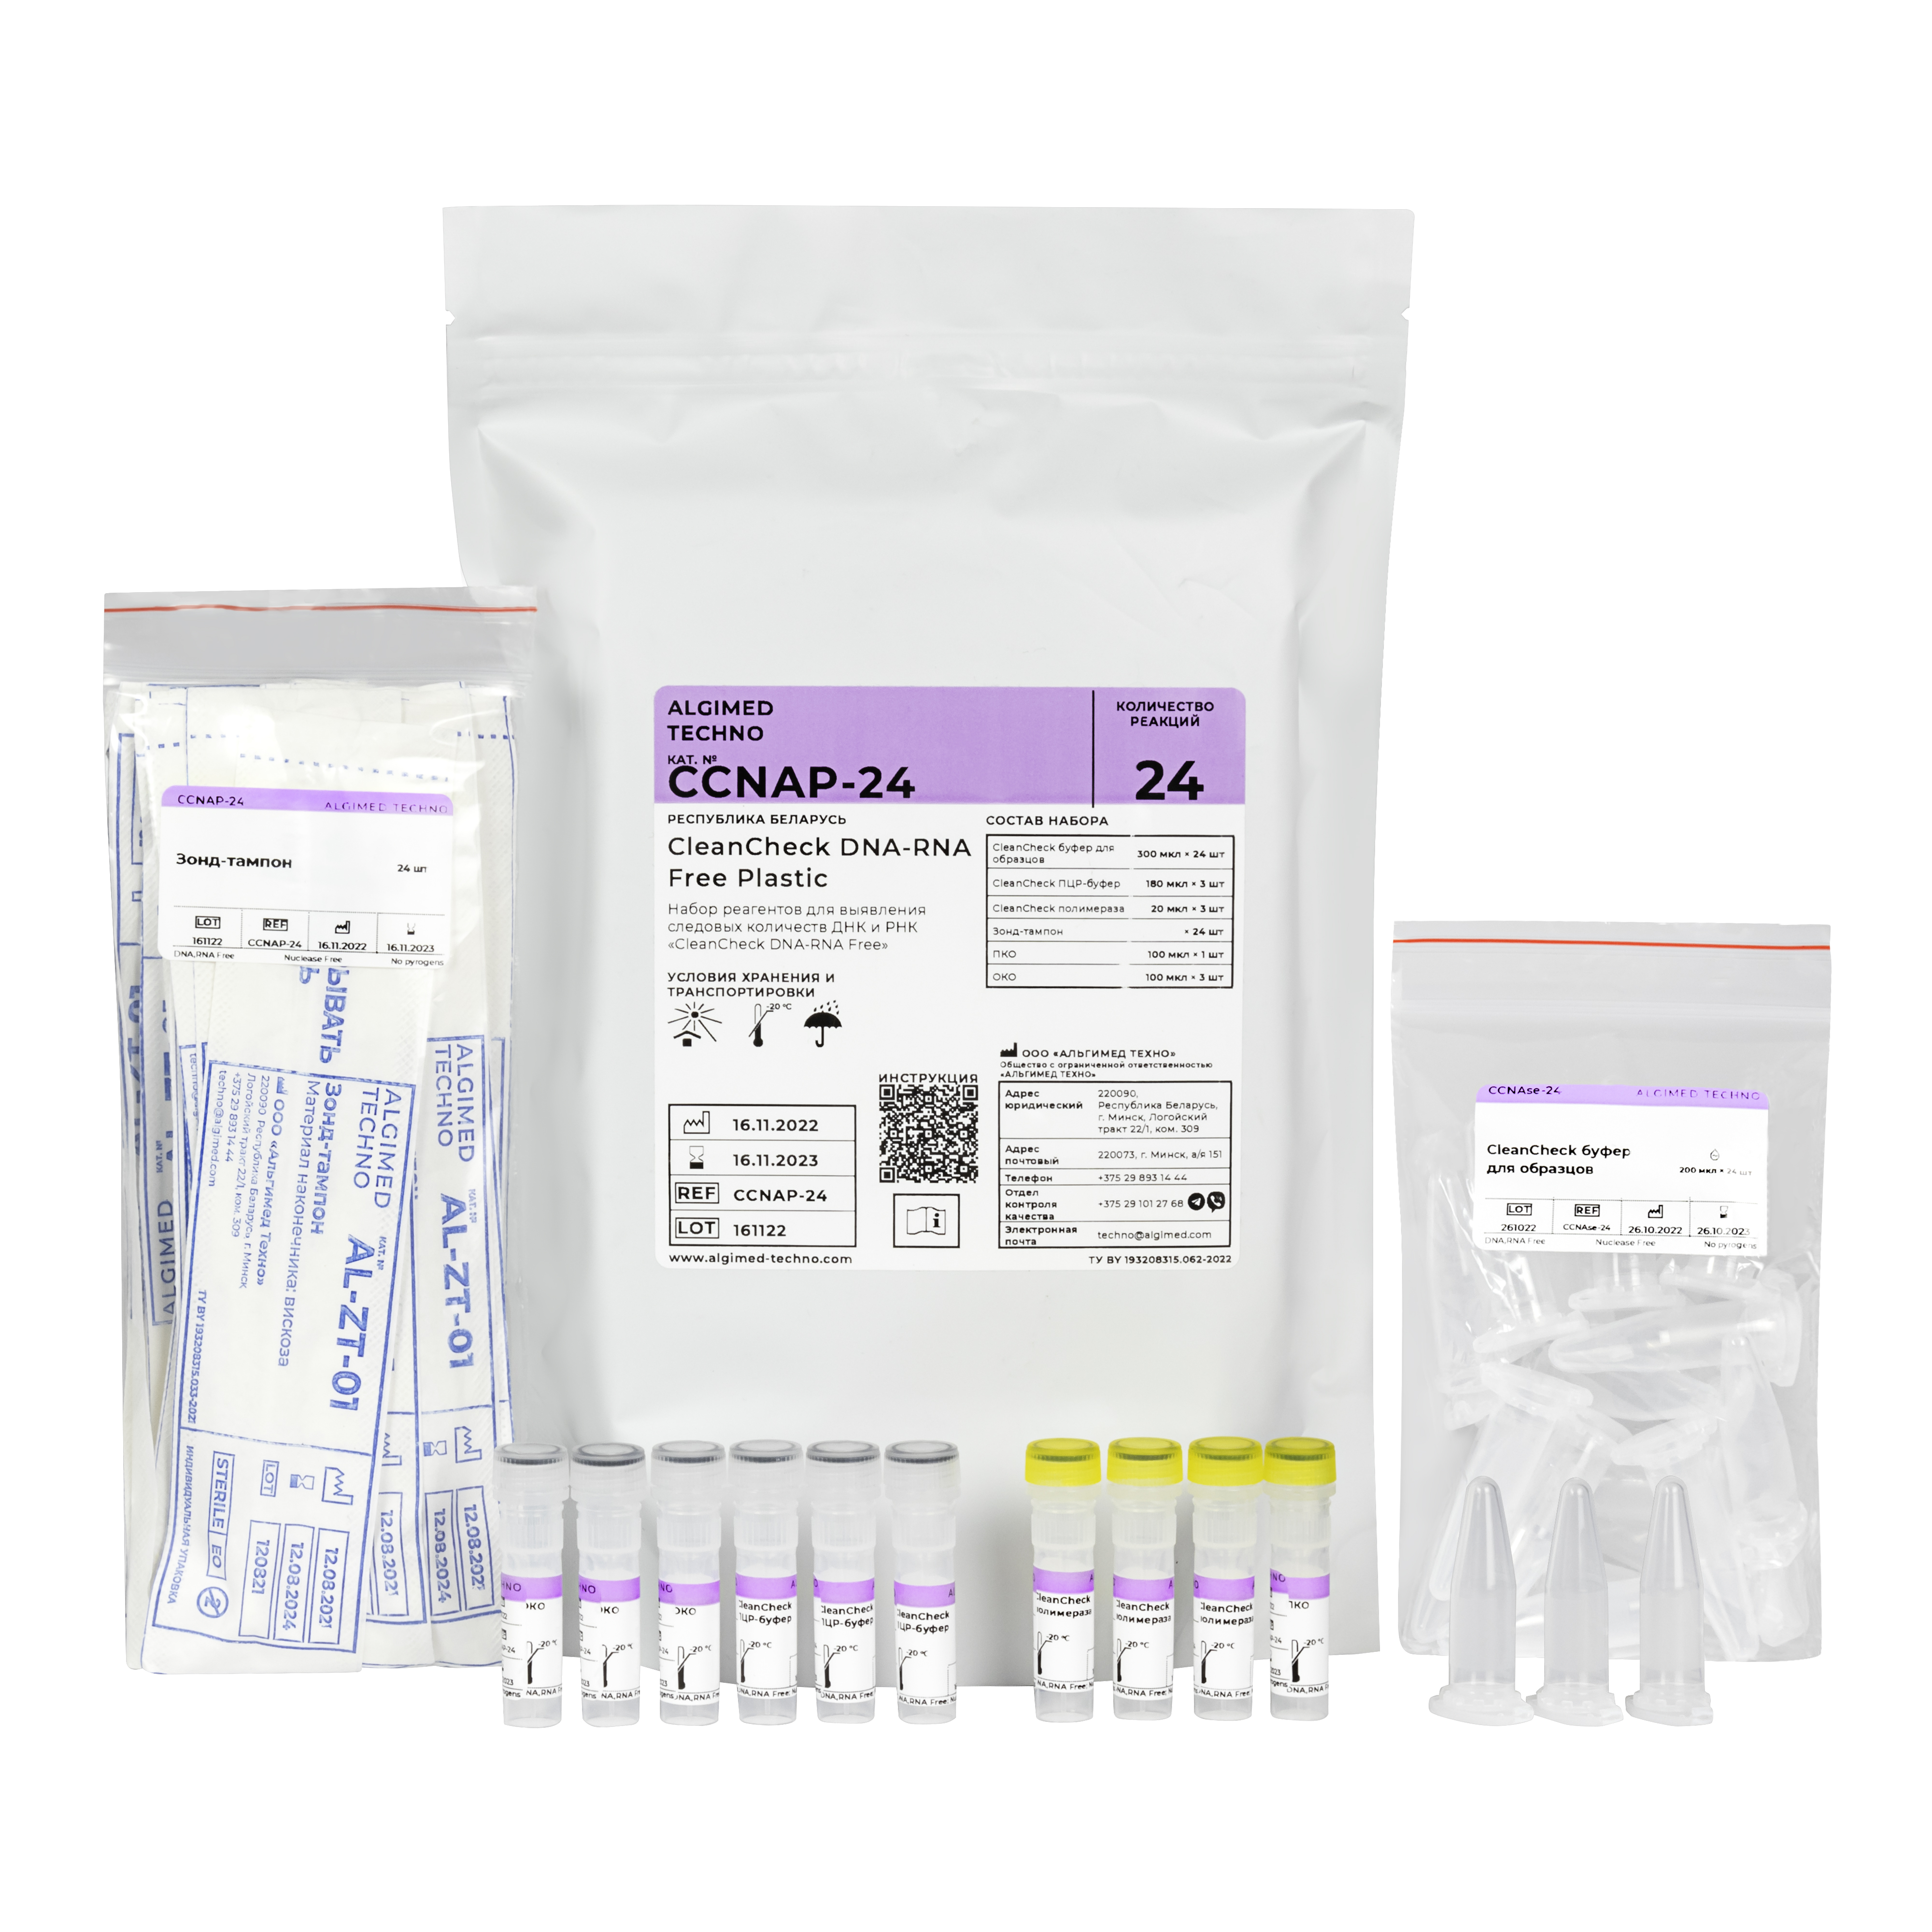 CleanCheck DNA-RNA Free Plastic